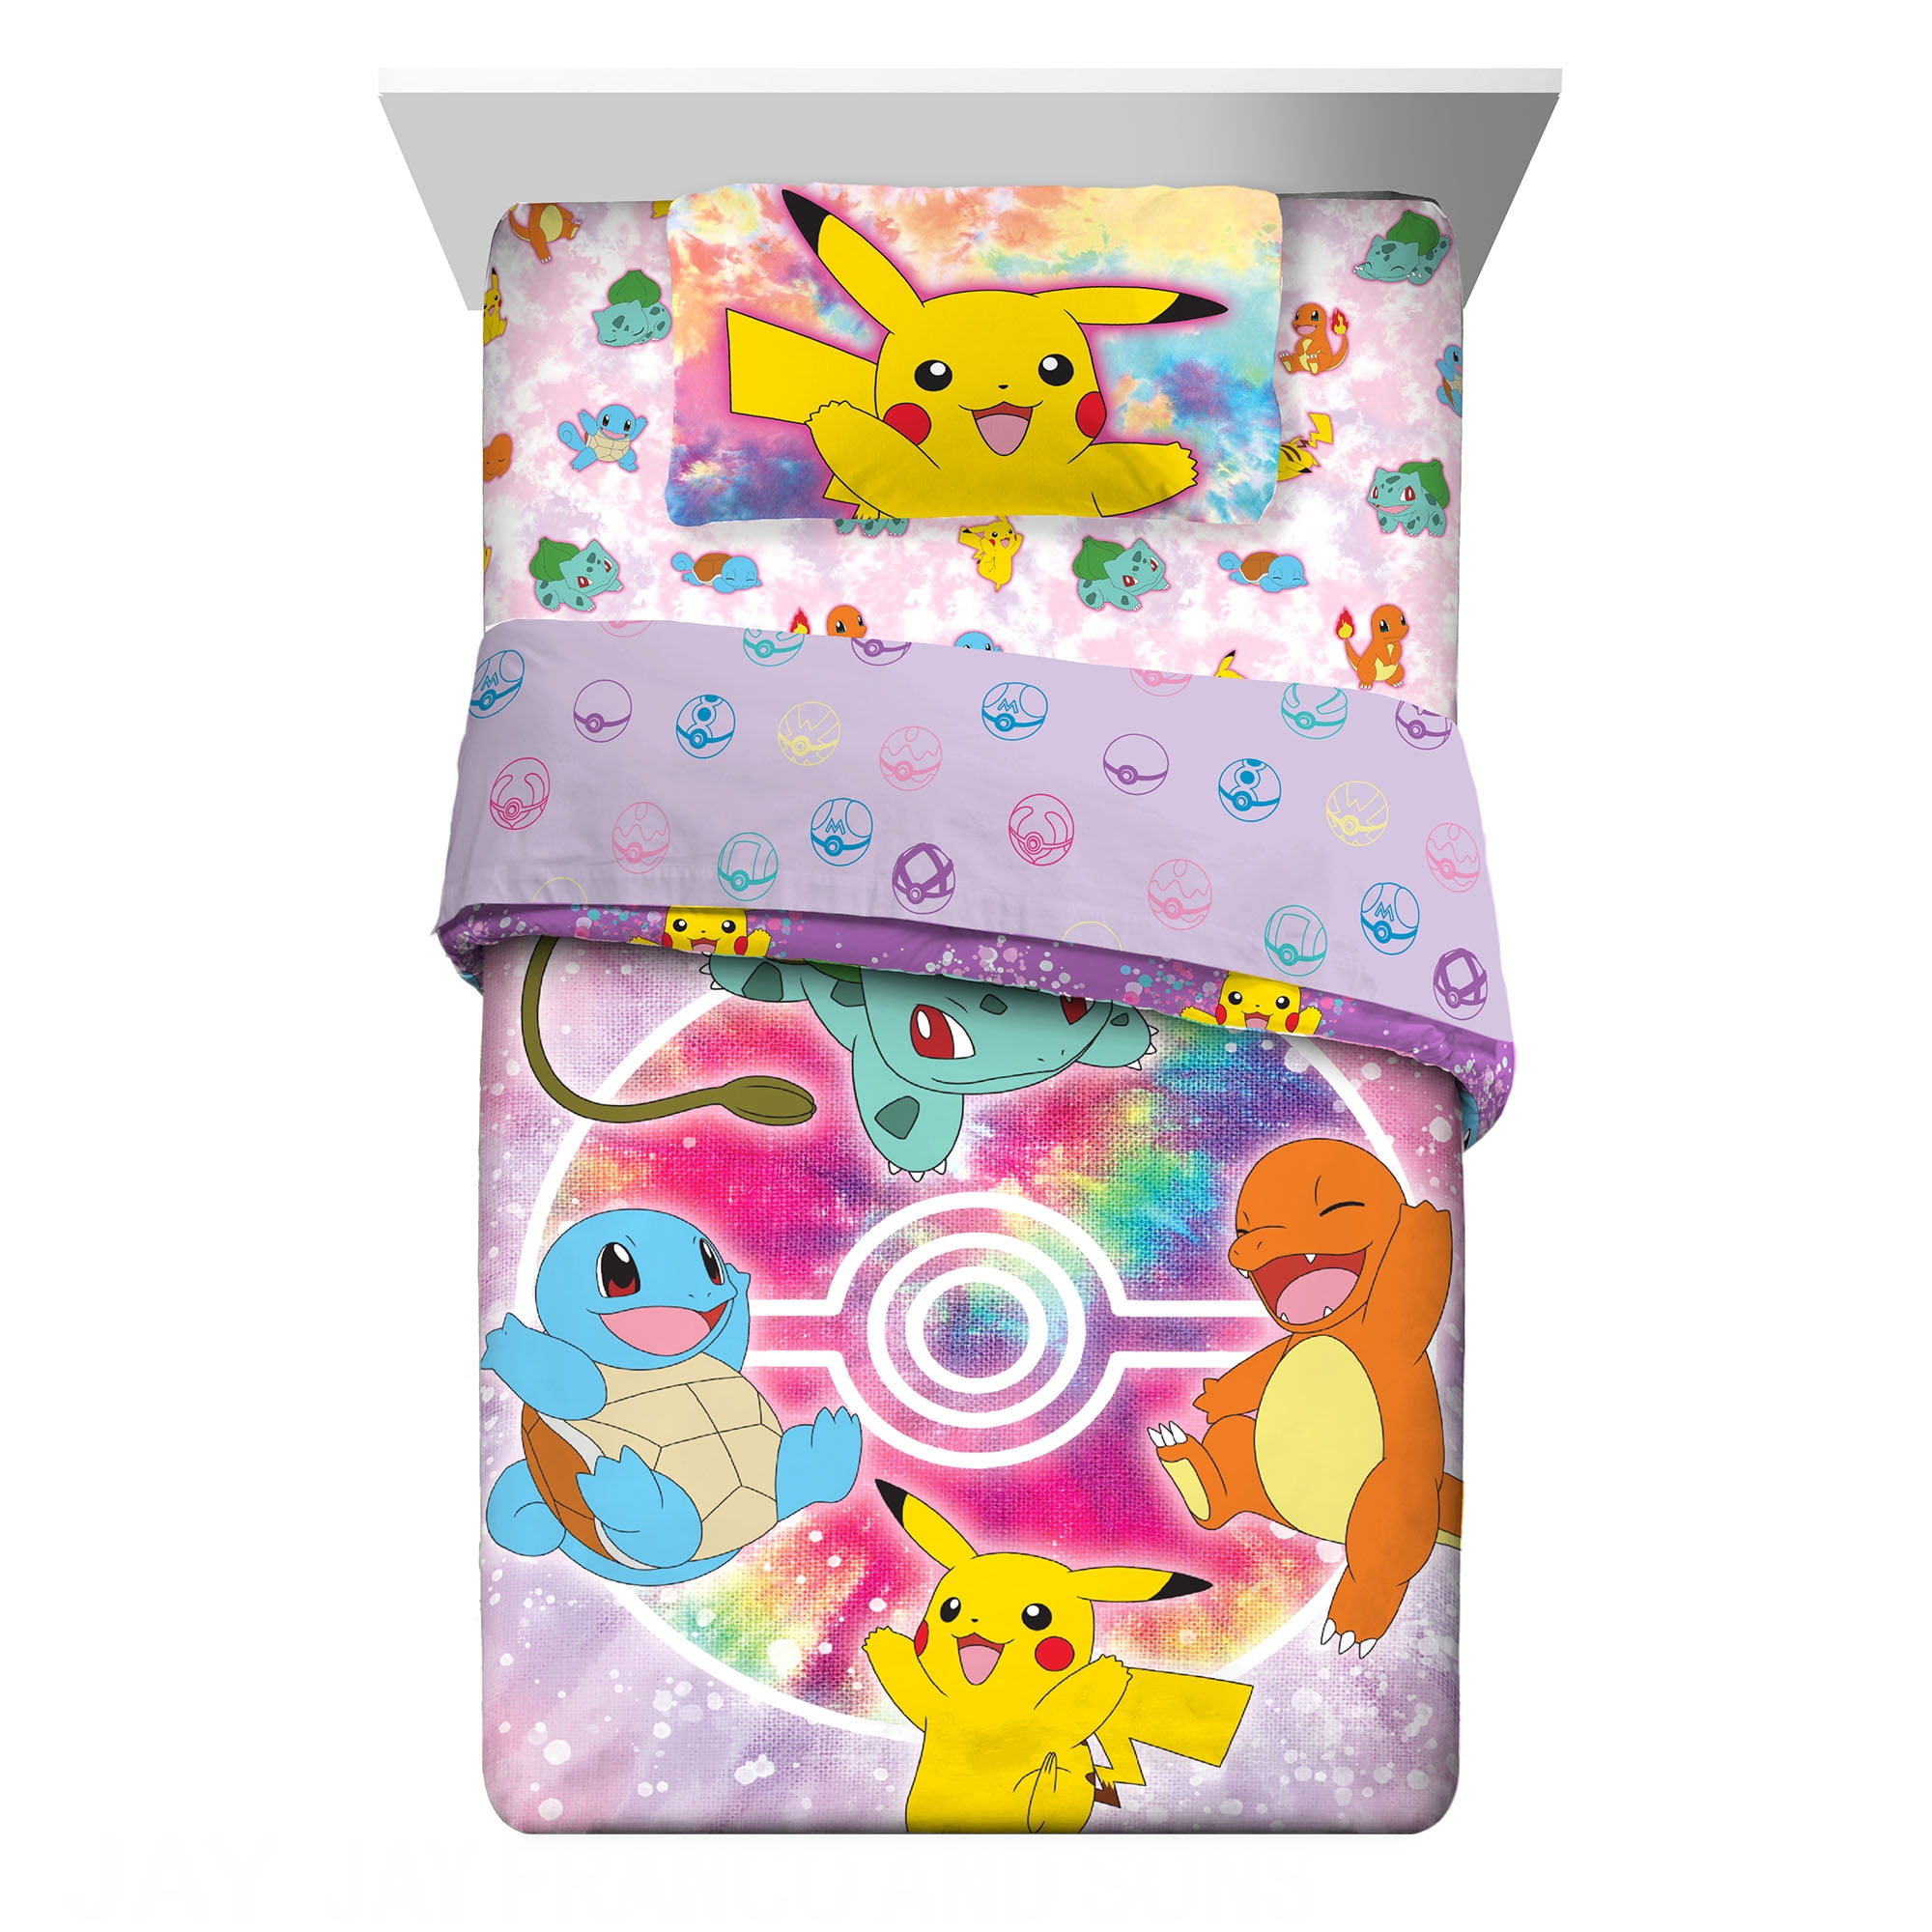 LOL Surprise Kids Twin Bed in a Bag, Comforter and Sheets, Pink 